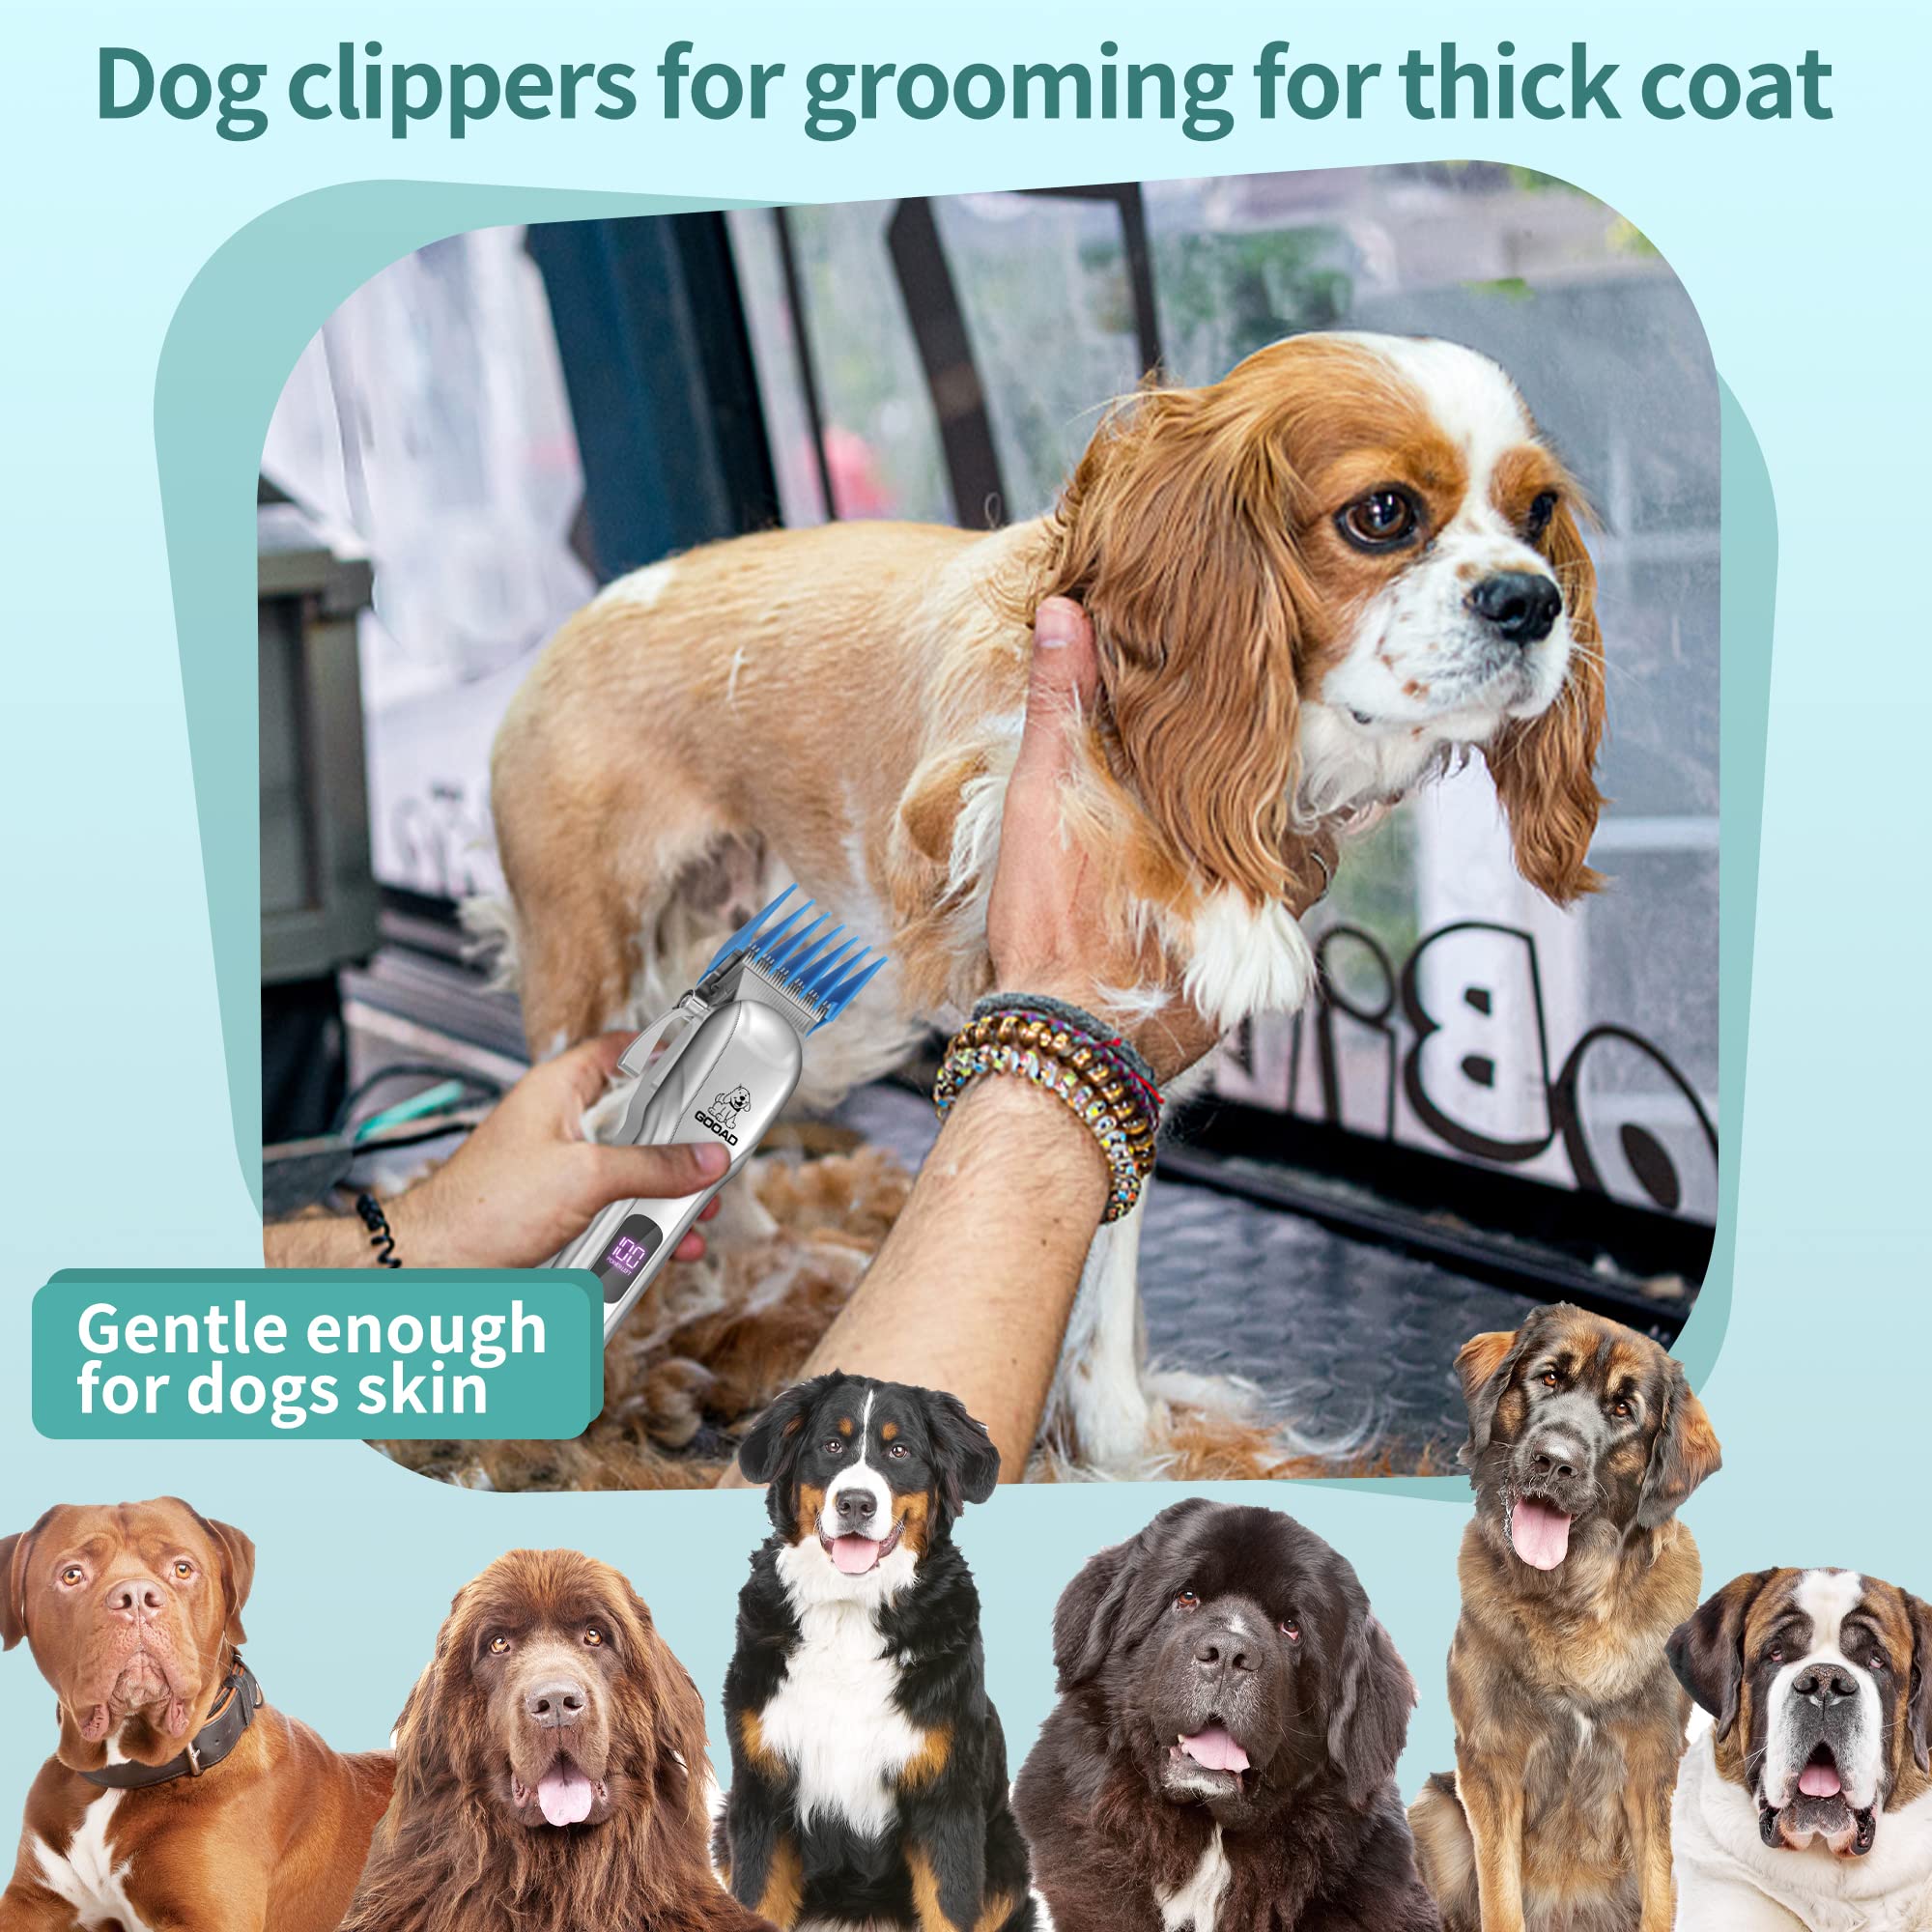 Gooad Dog Clippers for Grooming, Cordless,Low Noise, Electric Quiet,Rechargeable, Pet Hair Clippers for Thick Coats, Dog Trimmer Grooming Kit, Shaver for Small and Large Dogs Cats,Silver